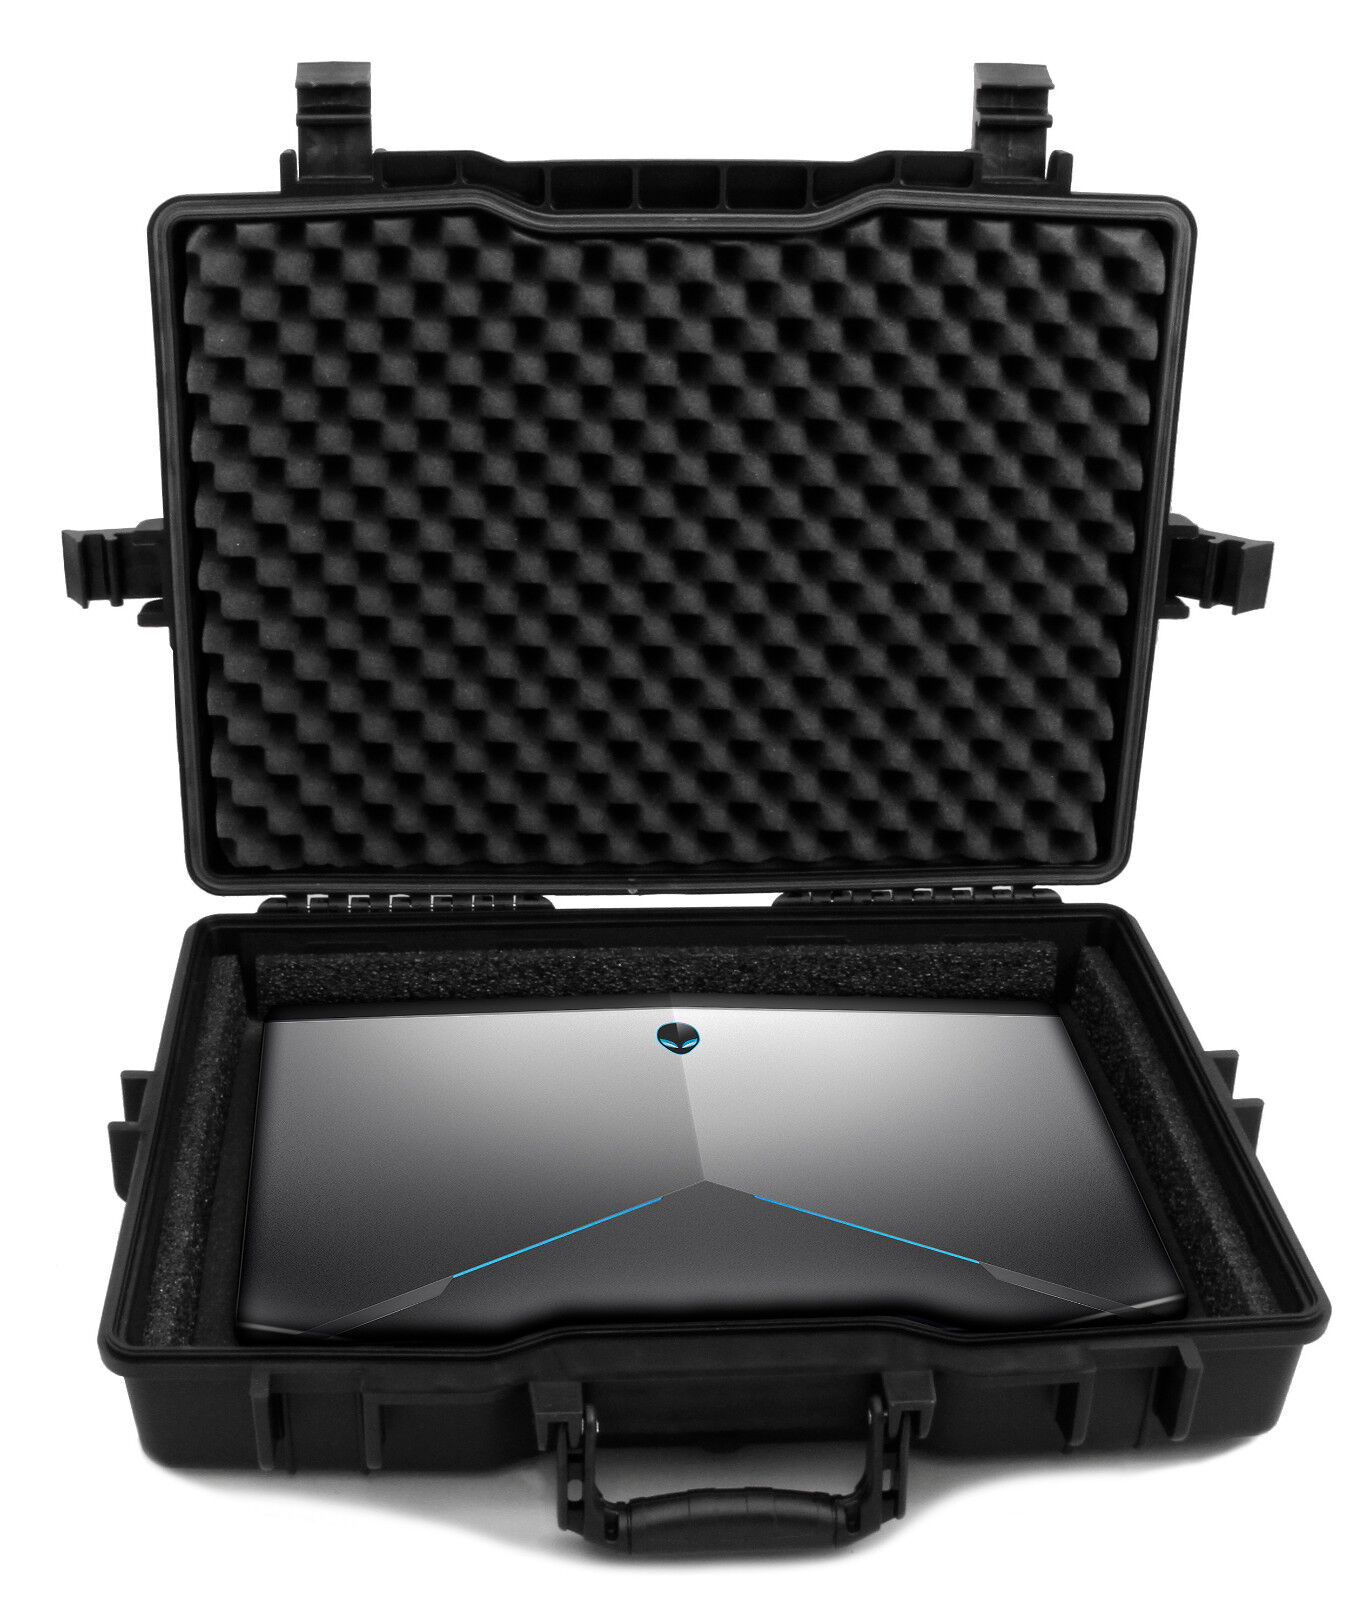 Custom Waterproof Laptop Case for Dell Alienware Laptop and More, Case Only